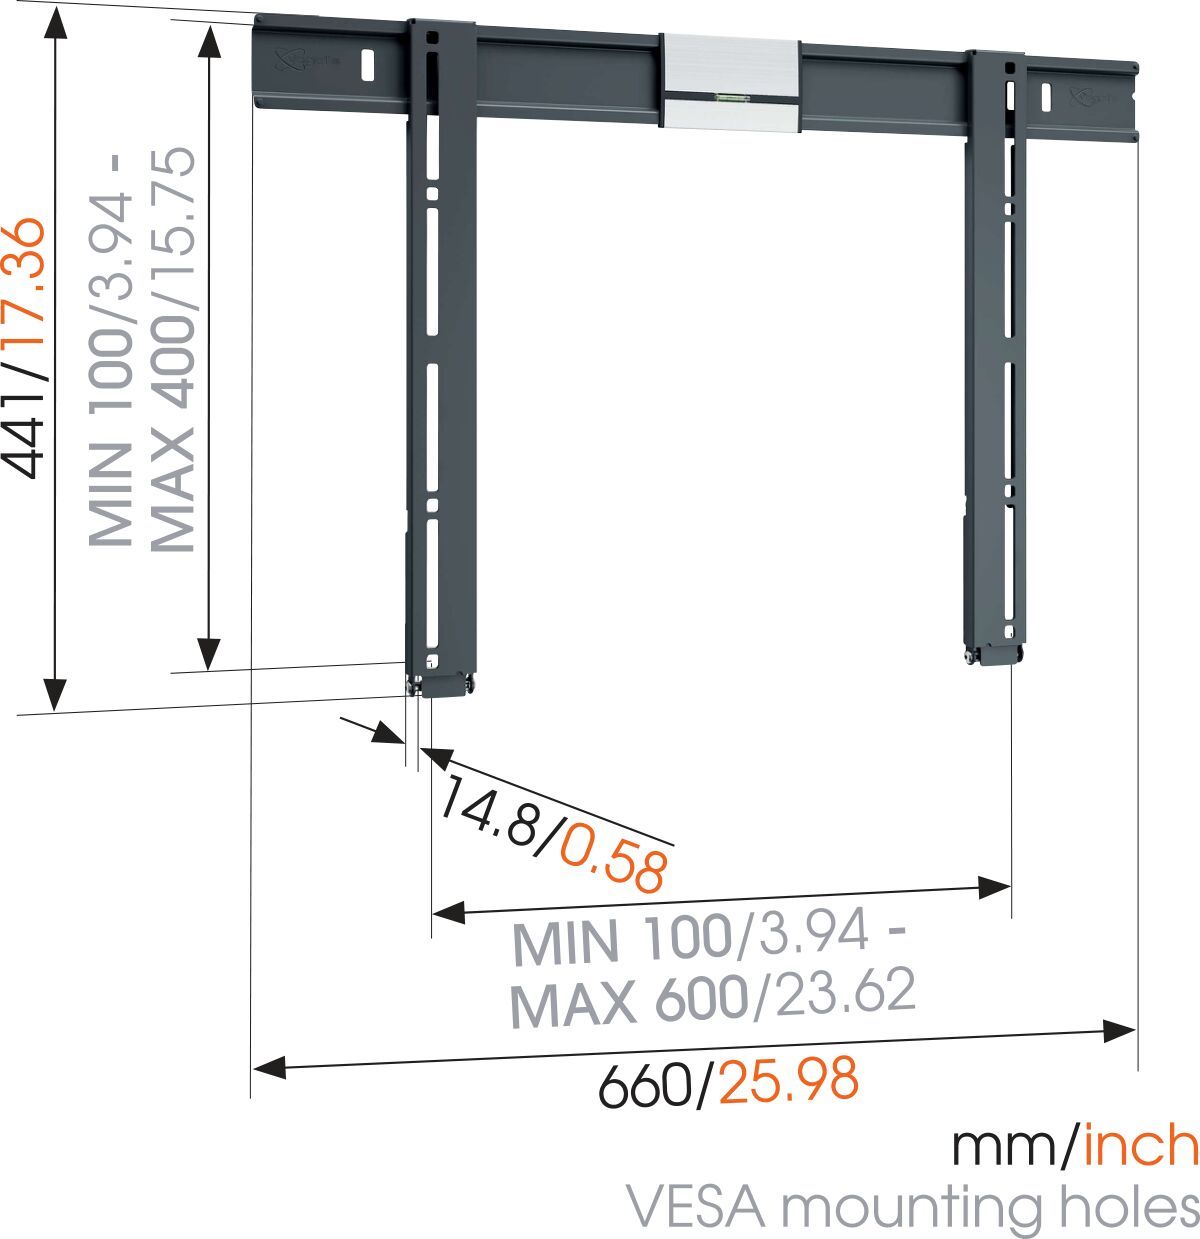 Vogel's THIN 505 ExtraThin Fixed TV Wall Mount - Suitable for 40 up to 65 inch TVs up to 40 kg - Dimensions